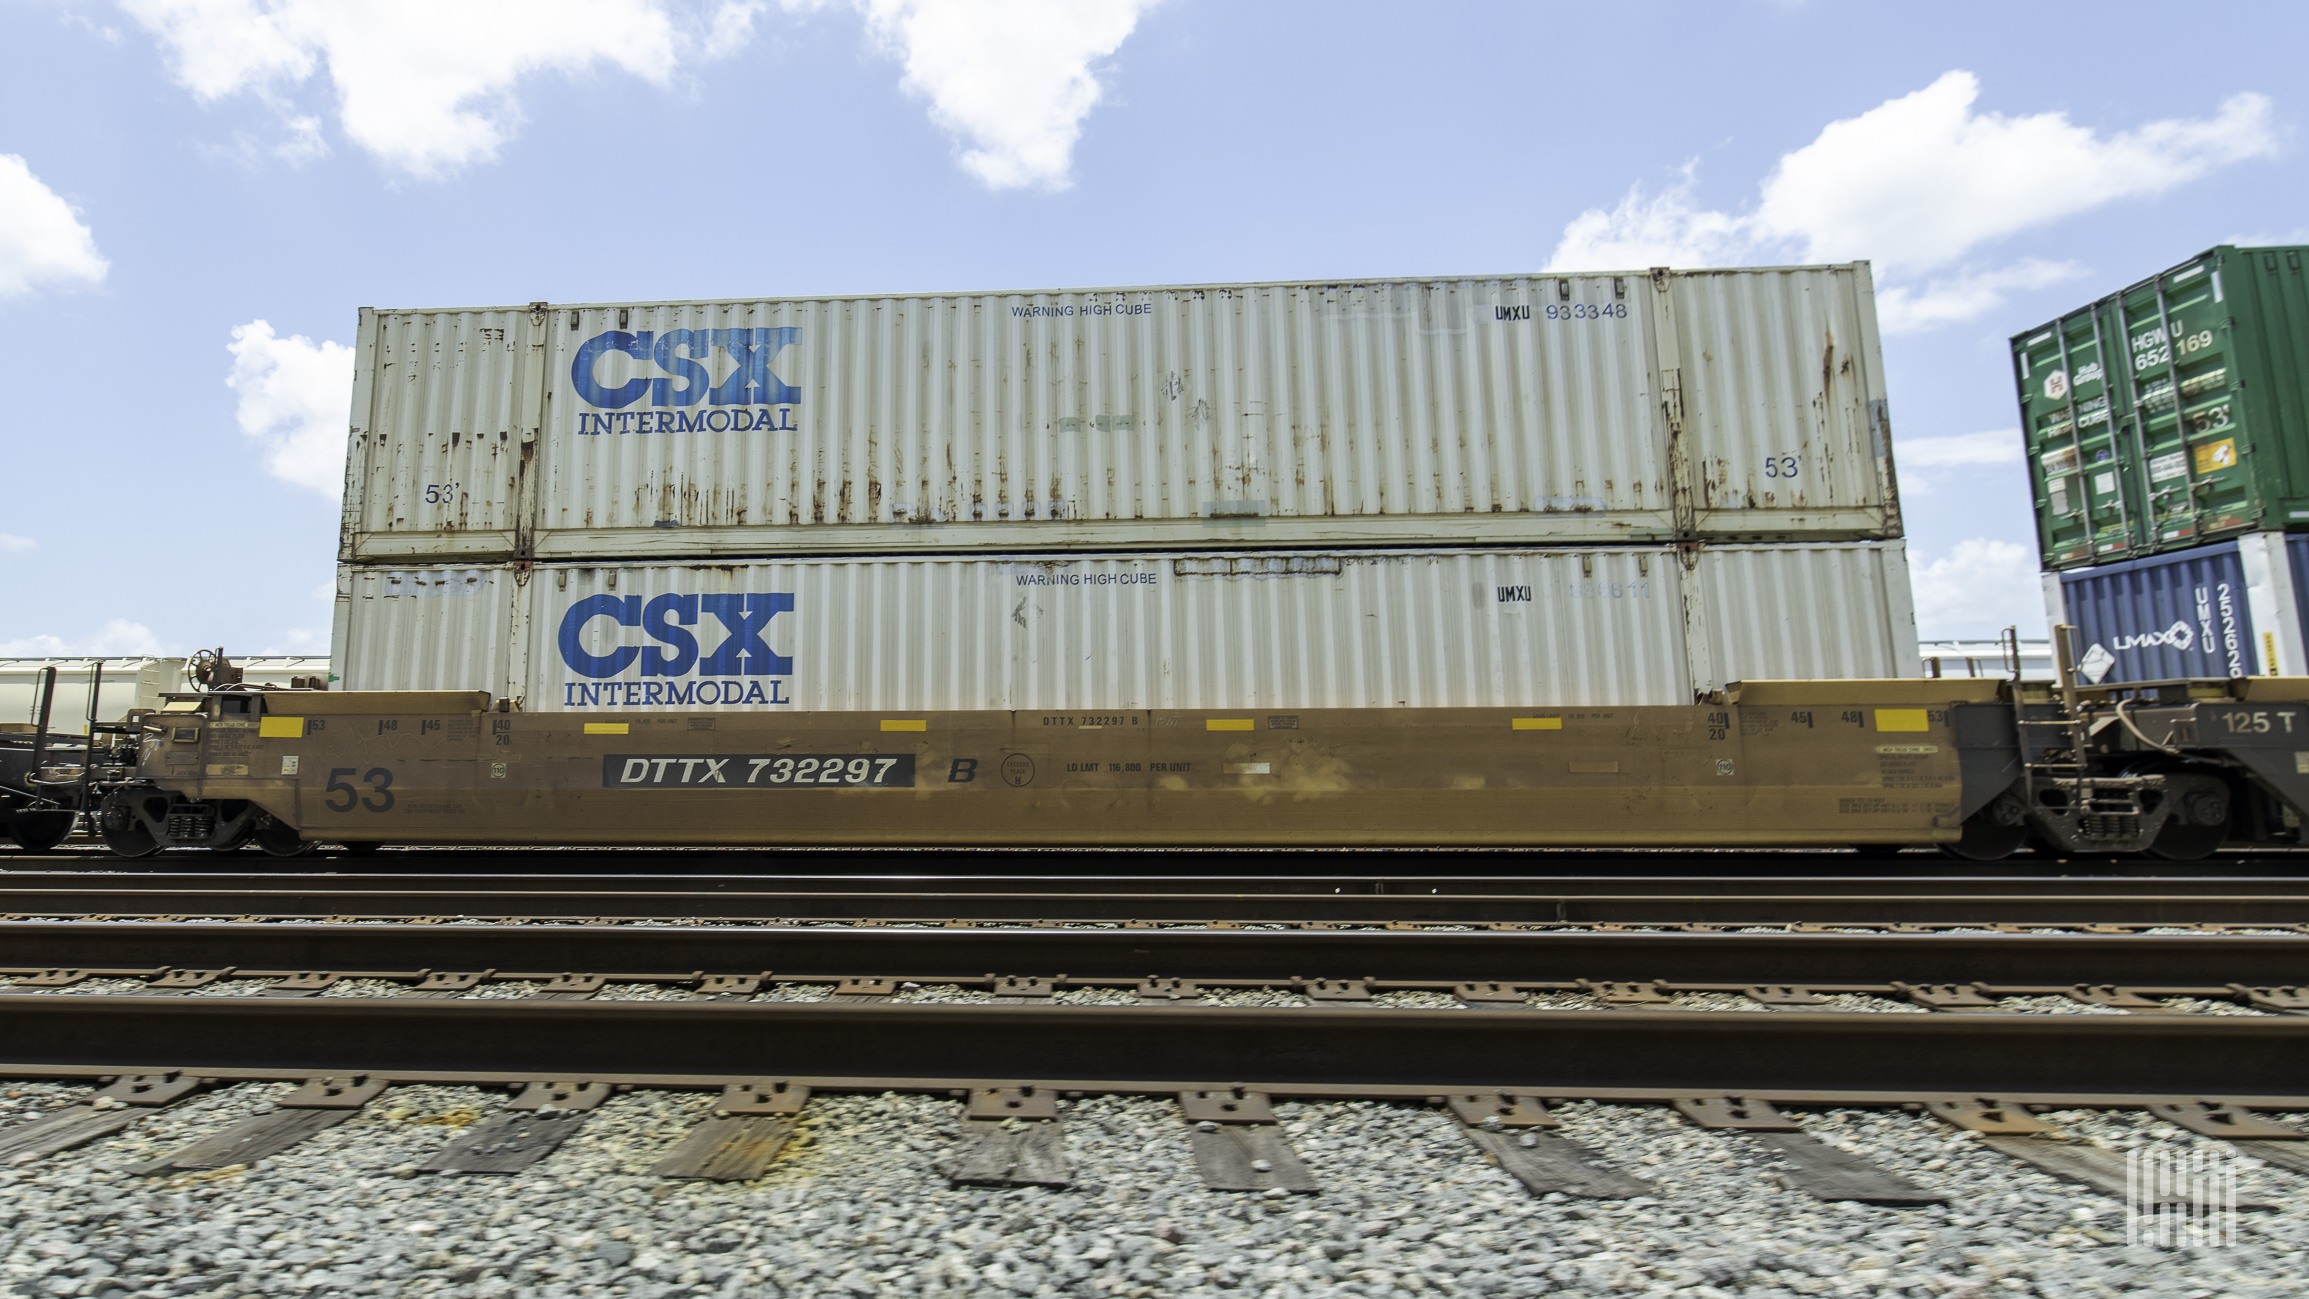 A photograph of intermodal containers on a train.